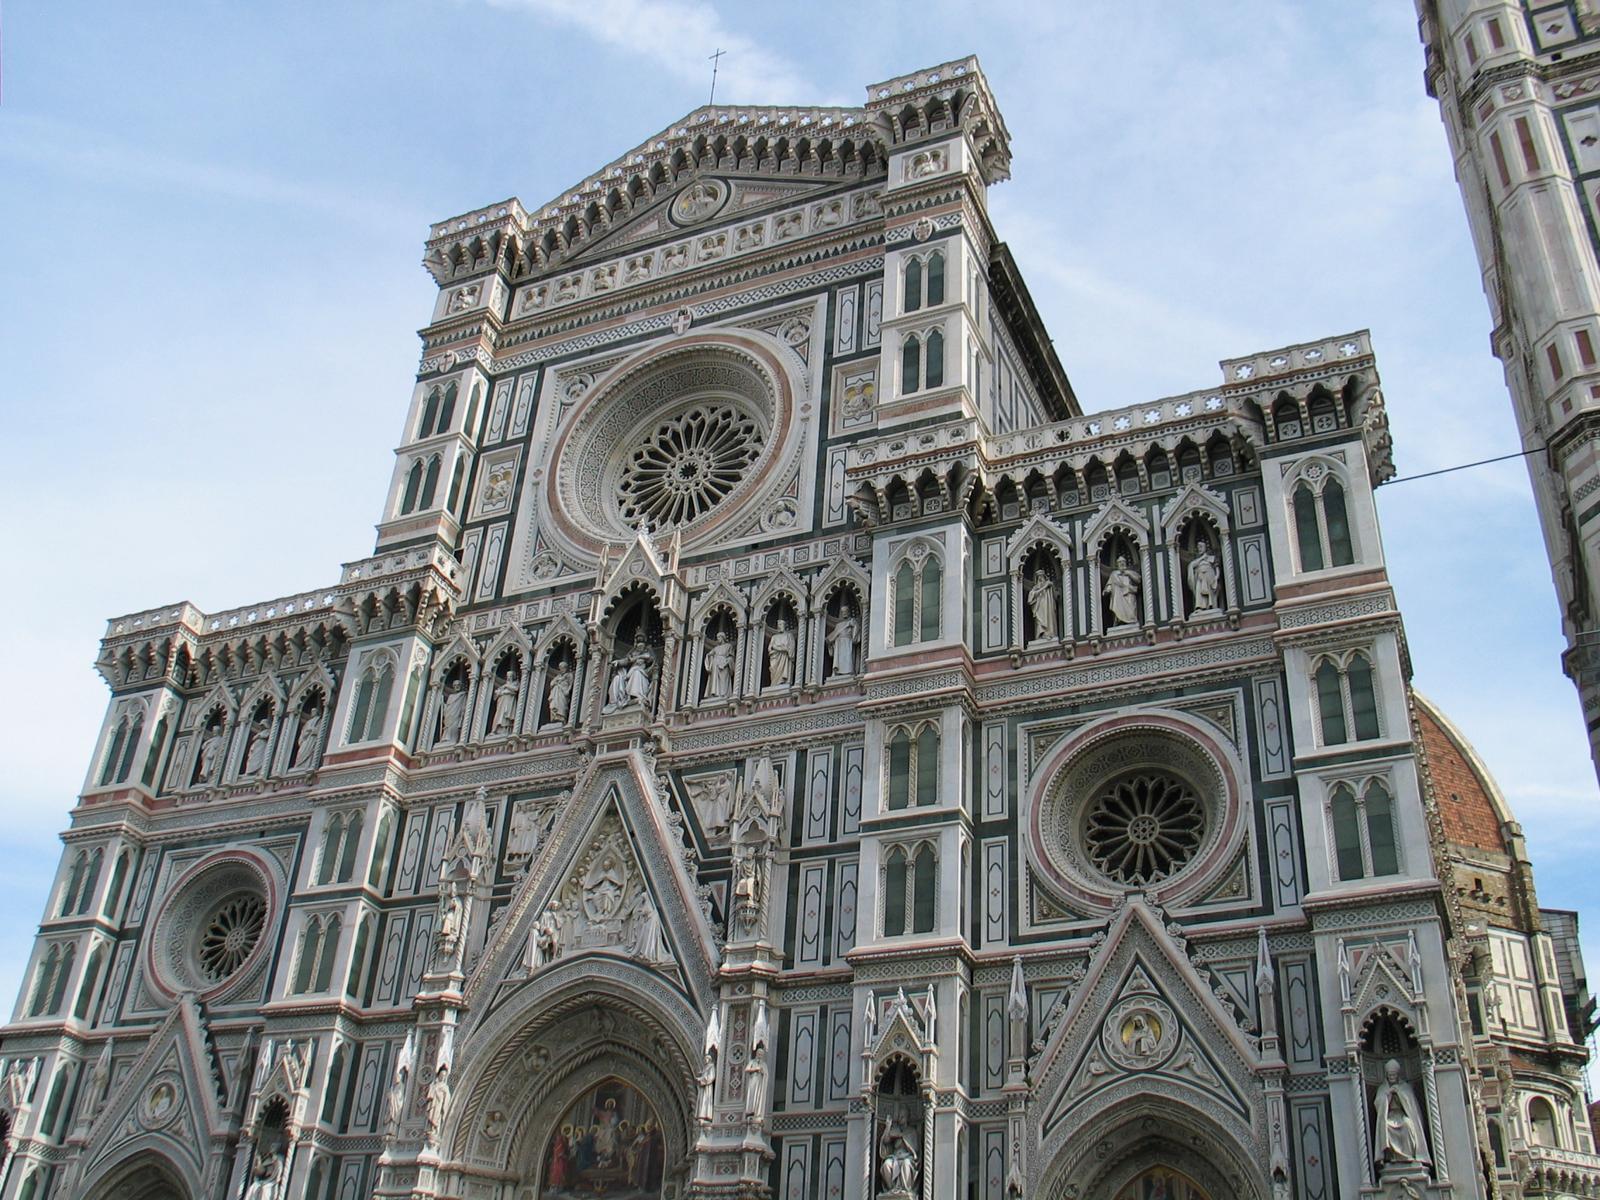 The Duomo from the ground